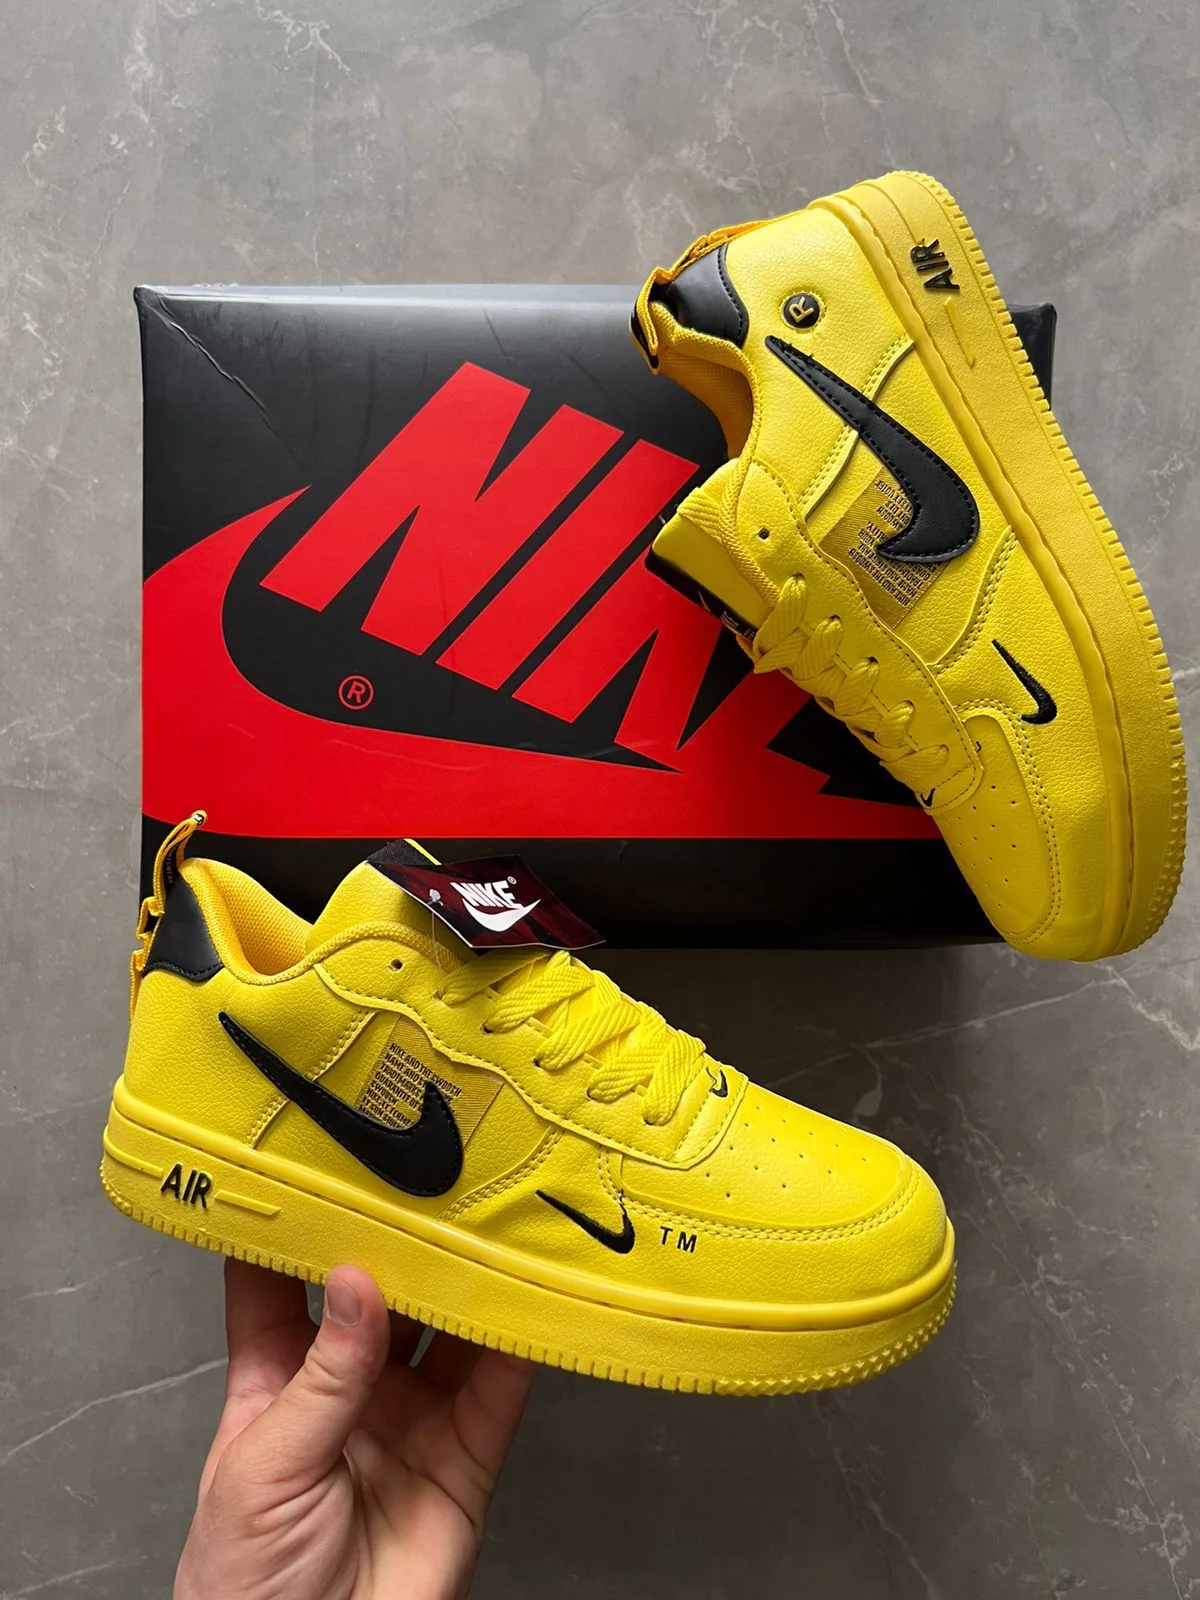 Airforce Tm Utility Sneakers Yellow